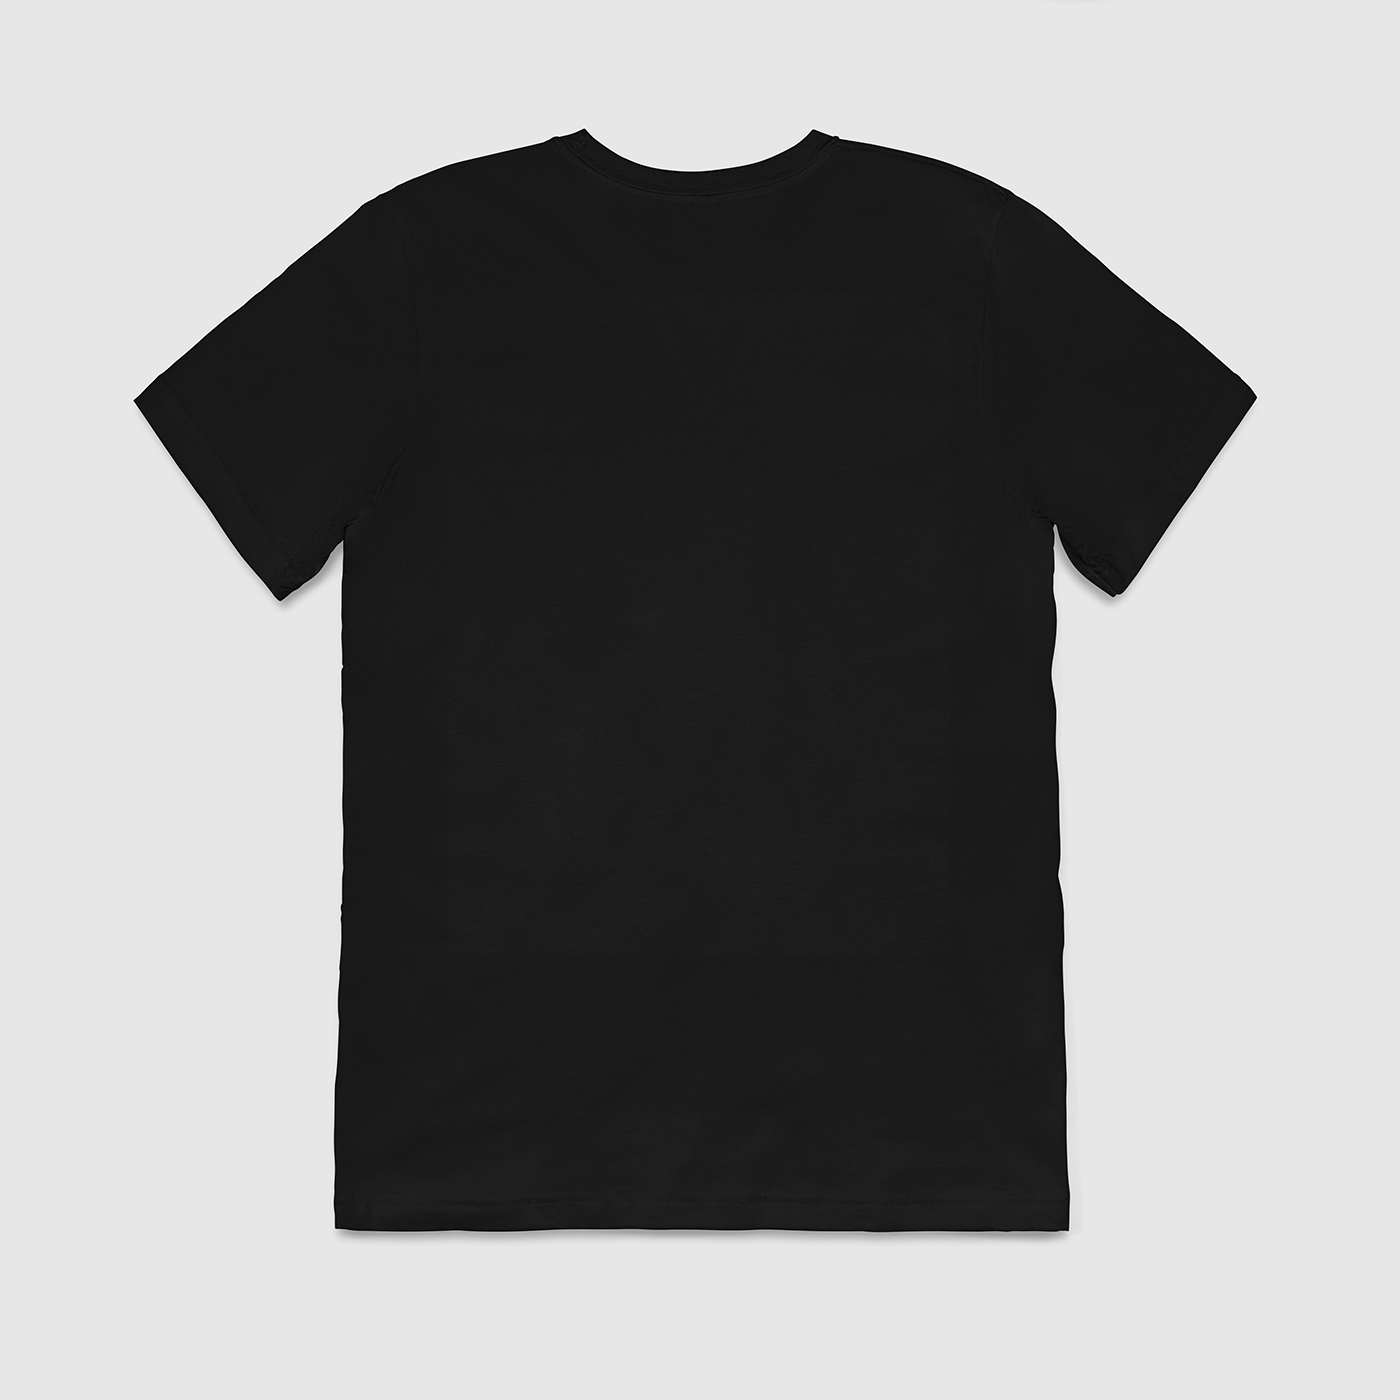 The back of the black Ooze Chroma t-shirt against a white background. It's a plain black shirt.